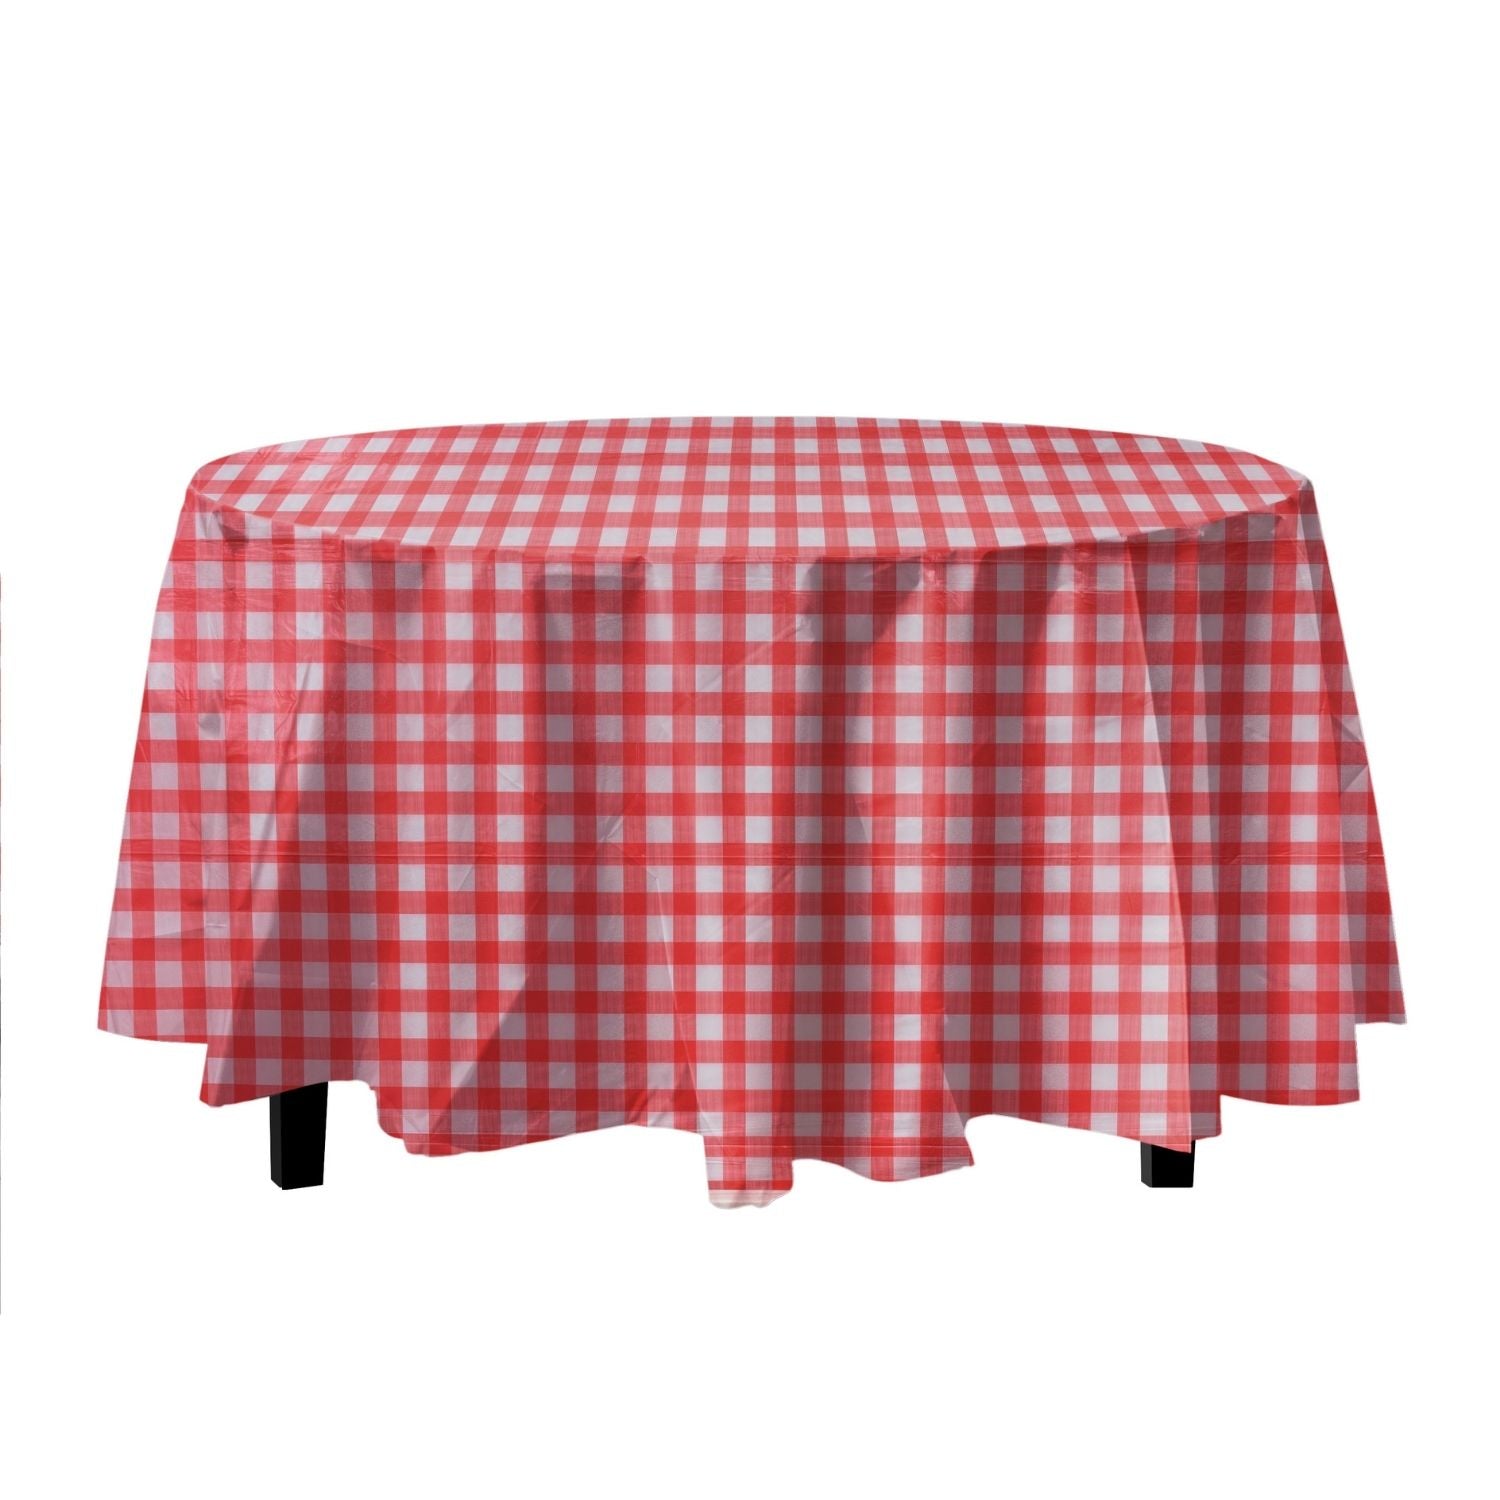 Red Gingham Printed Plastic Round Tablecloth | 48 Count